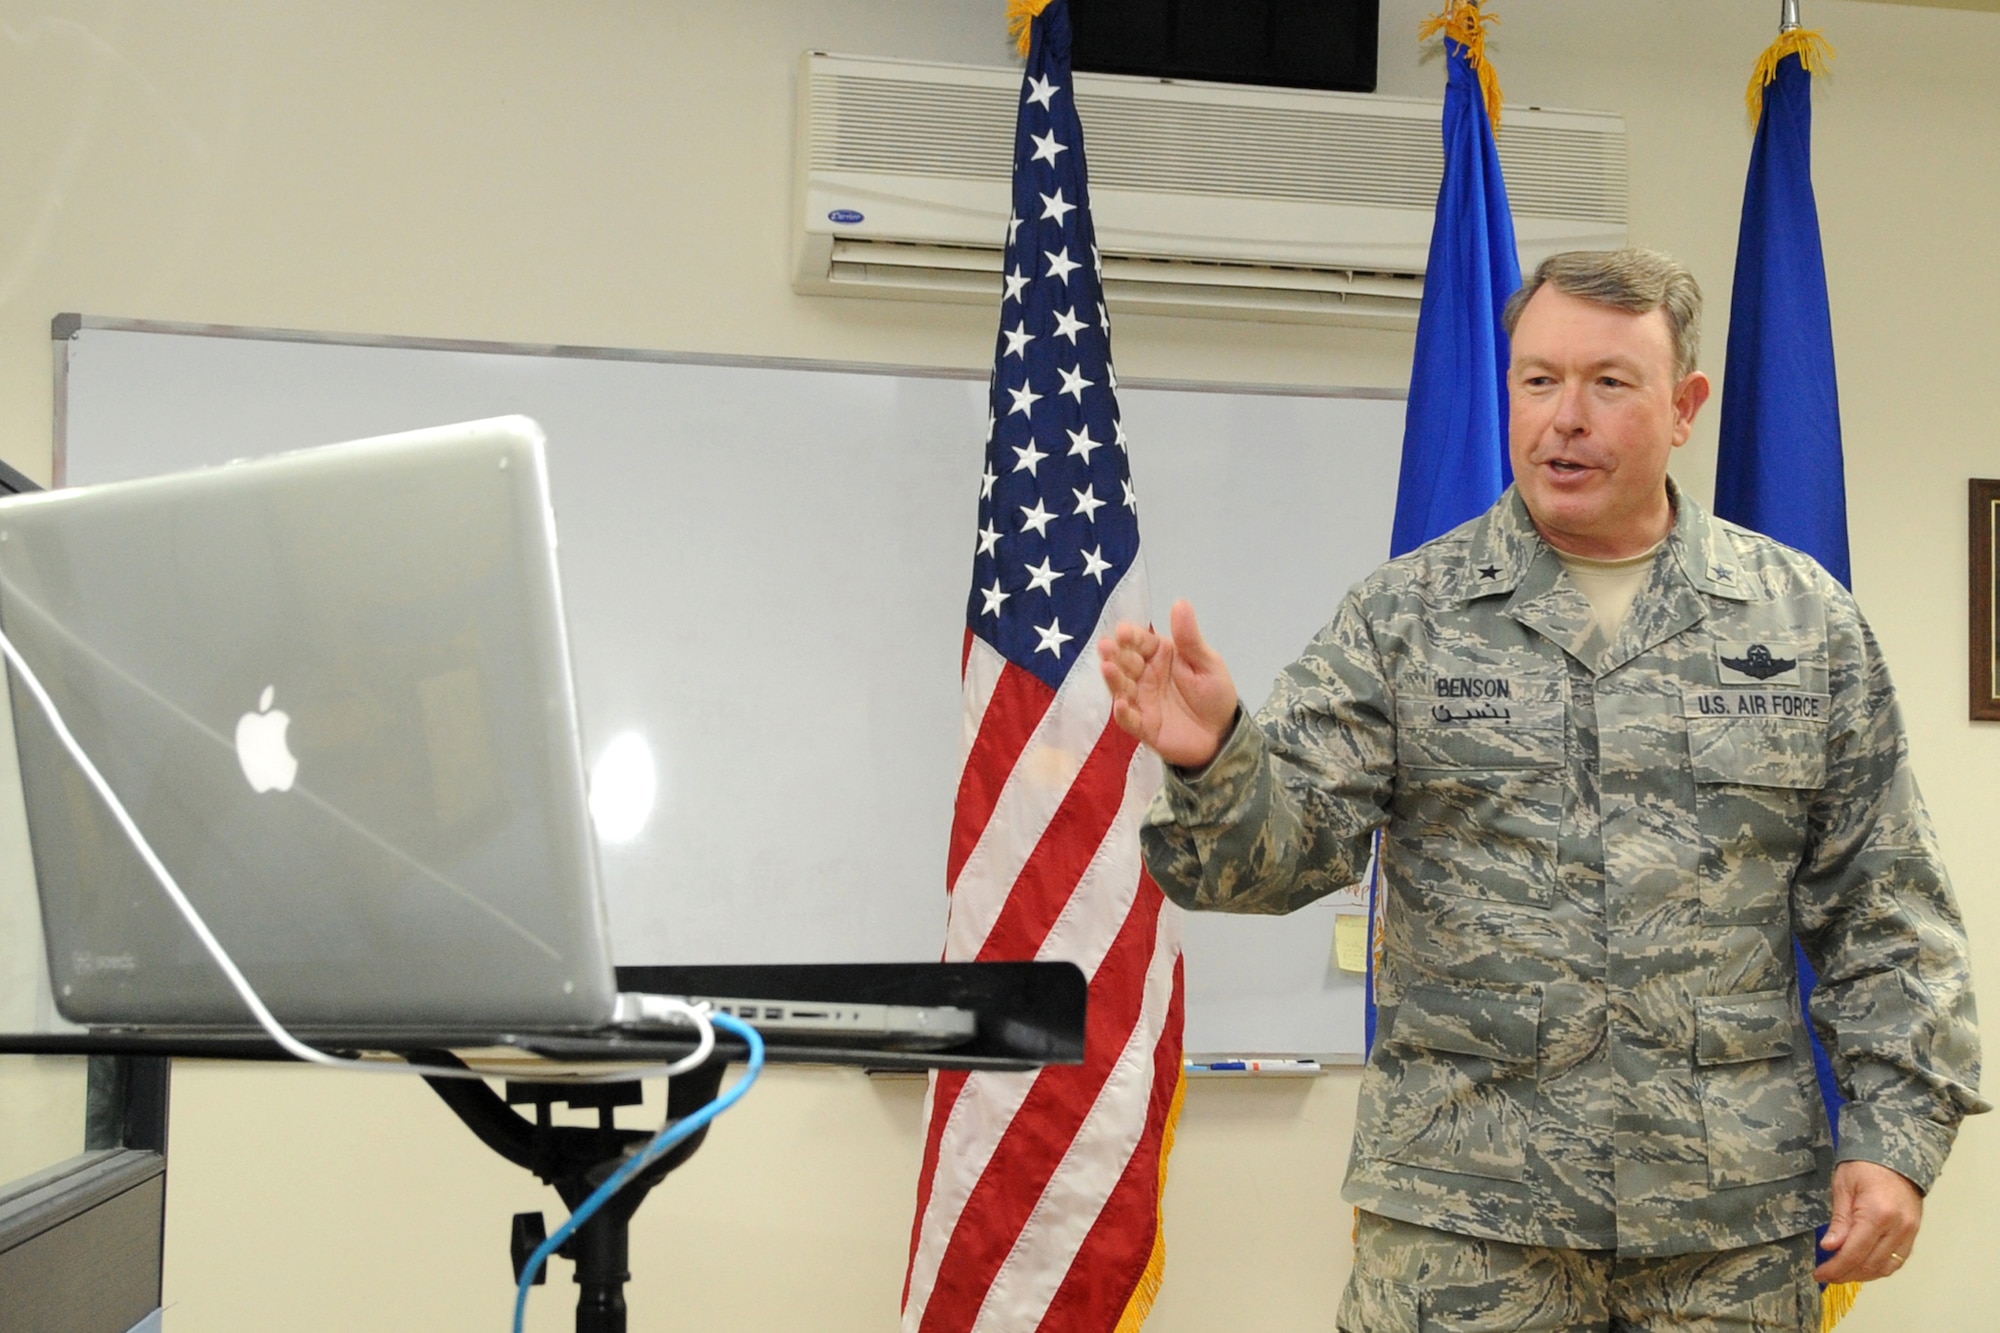 Brig. Gen. Bryan J. Benson, commander, 380th Air Expeditionary Wing, speaks to Maj. Brian Vance's family via a laptop computer screen during the major's promotion ceremony March 31, 2010, at an undisclosed base in Southwest Asia. The laptop allowed the Vance family to attend the ceremony virtually through a Voice over Internet Protocol or VoIP connection. While Major Vance was deployed his family was at home in Virginia. (U.S. Air Force photo/Senior Airman Jenifer H. Calhoun/Released)